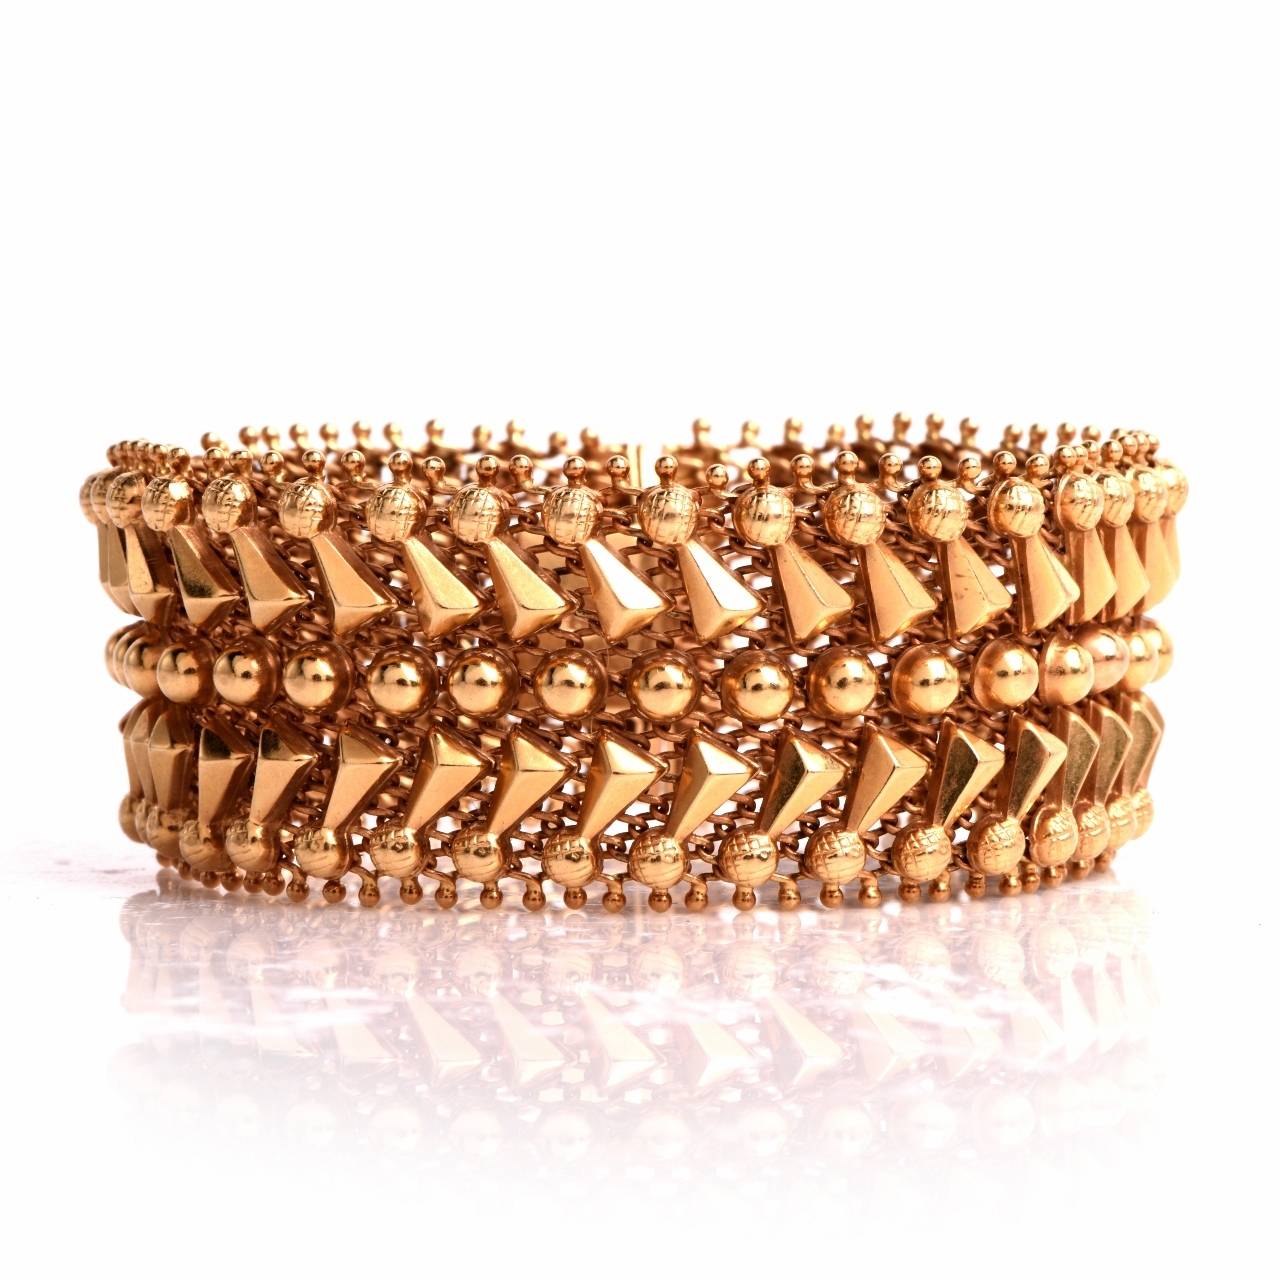 This Vintage bracelet of artistic design and workmanship is handcrafted in solid 18K yellow gold. It is of Italian provenance and bears the Hallmark of Italy for authenticity. Quintessentially Etruscan style in design and application of the antique